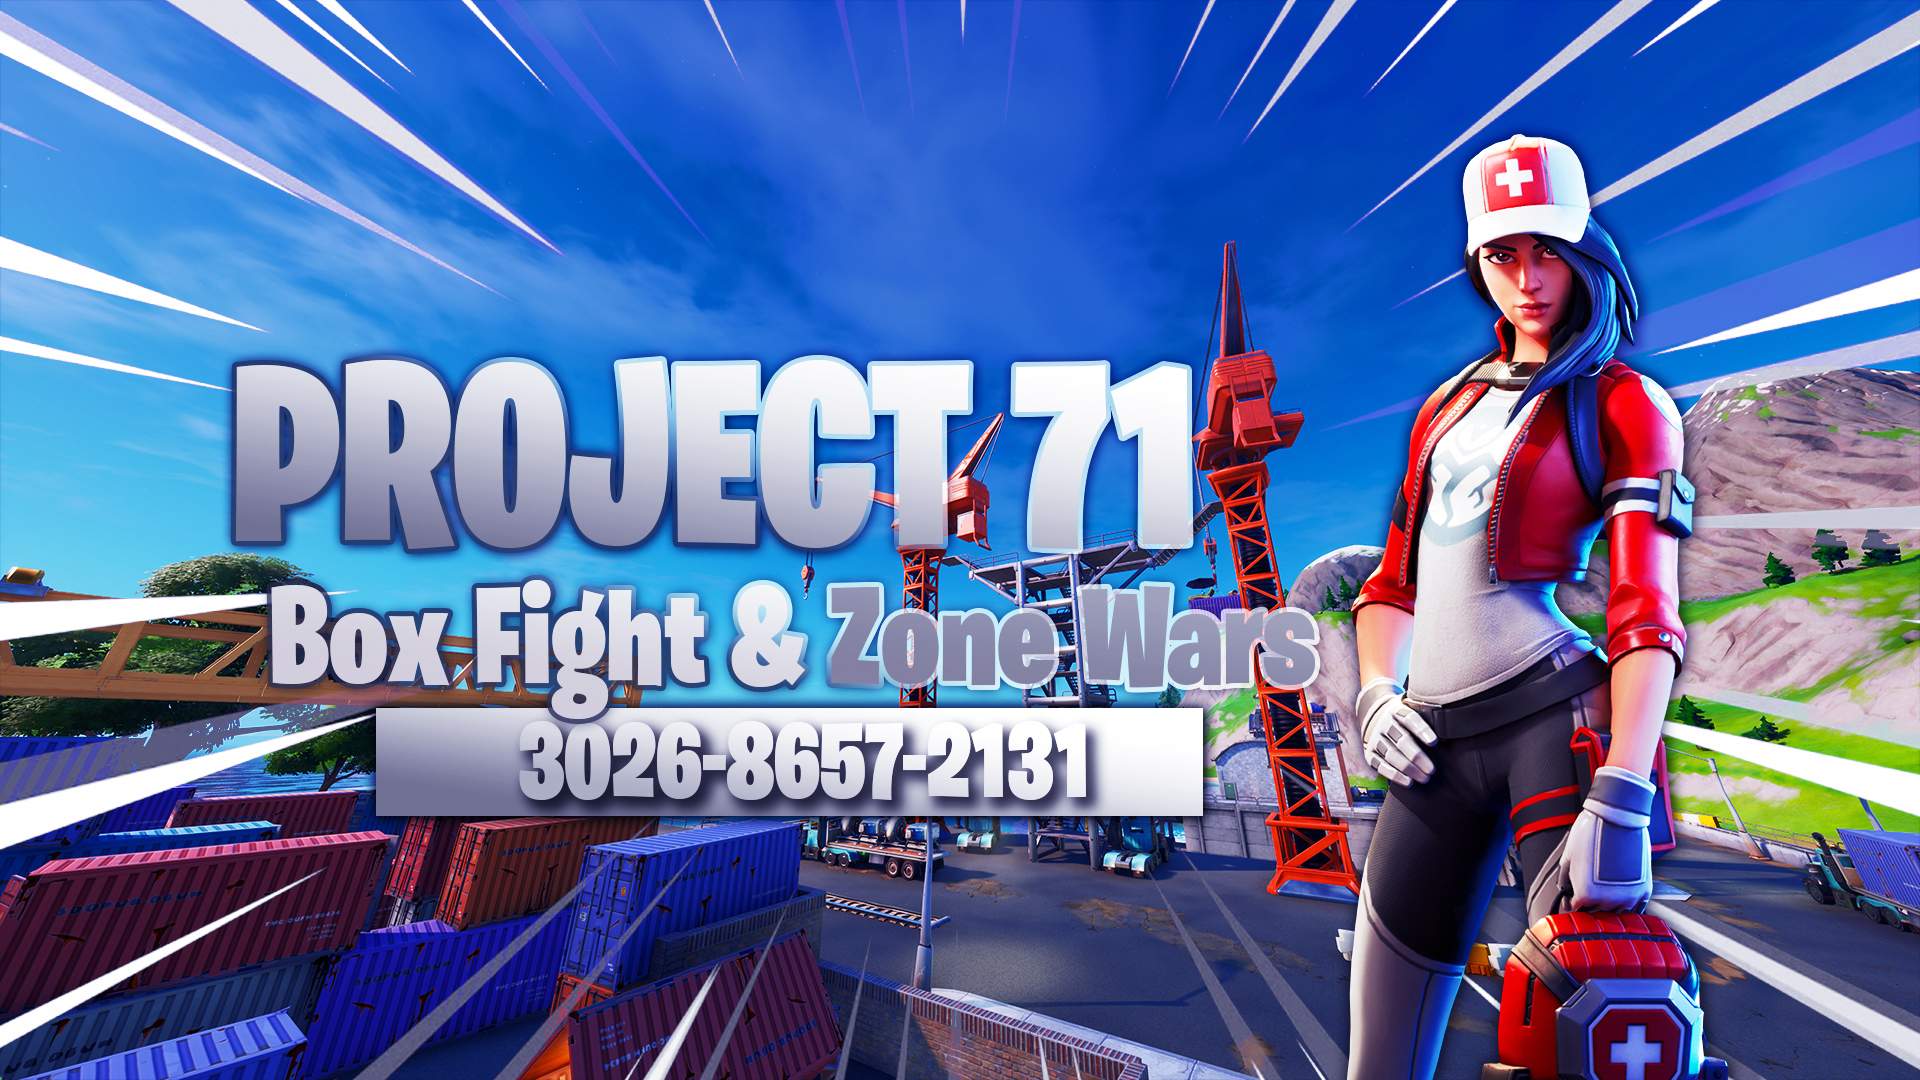 Solo Box Fight Zone Wars Just Try Iy Fortnite Creative Map Code Dropnite